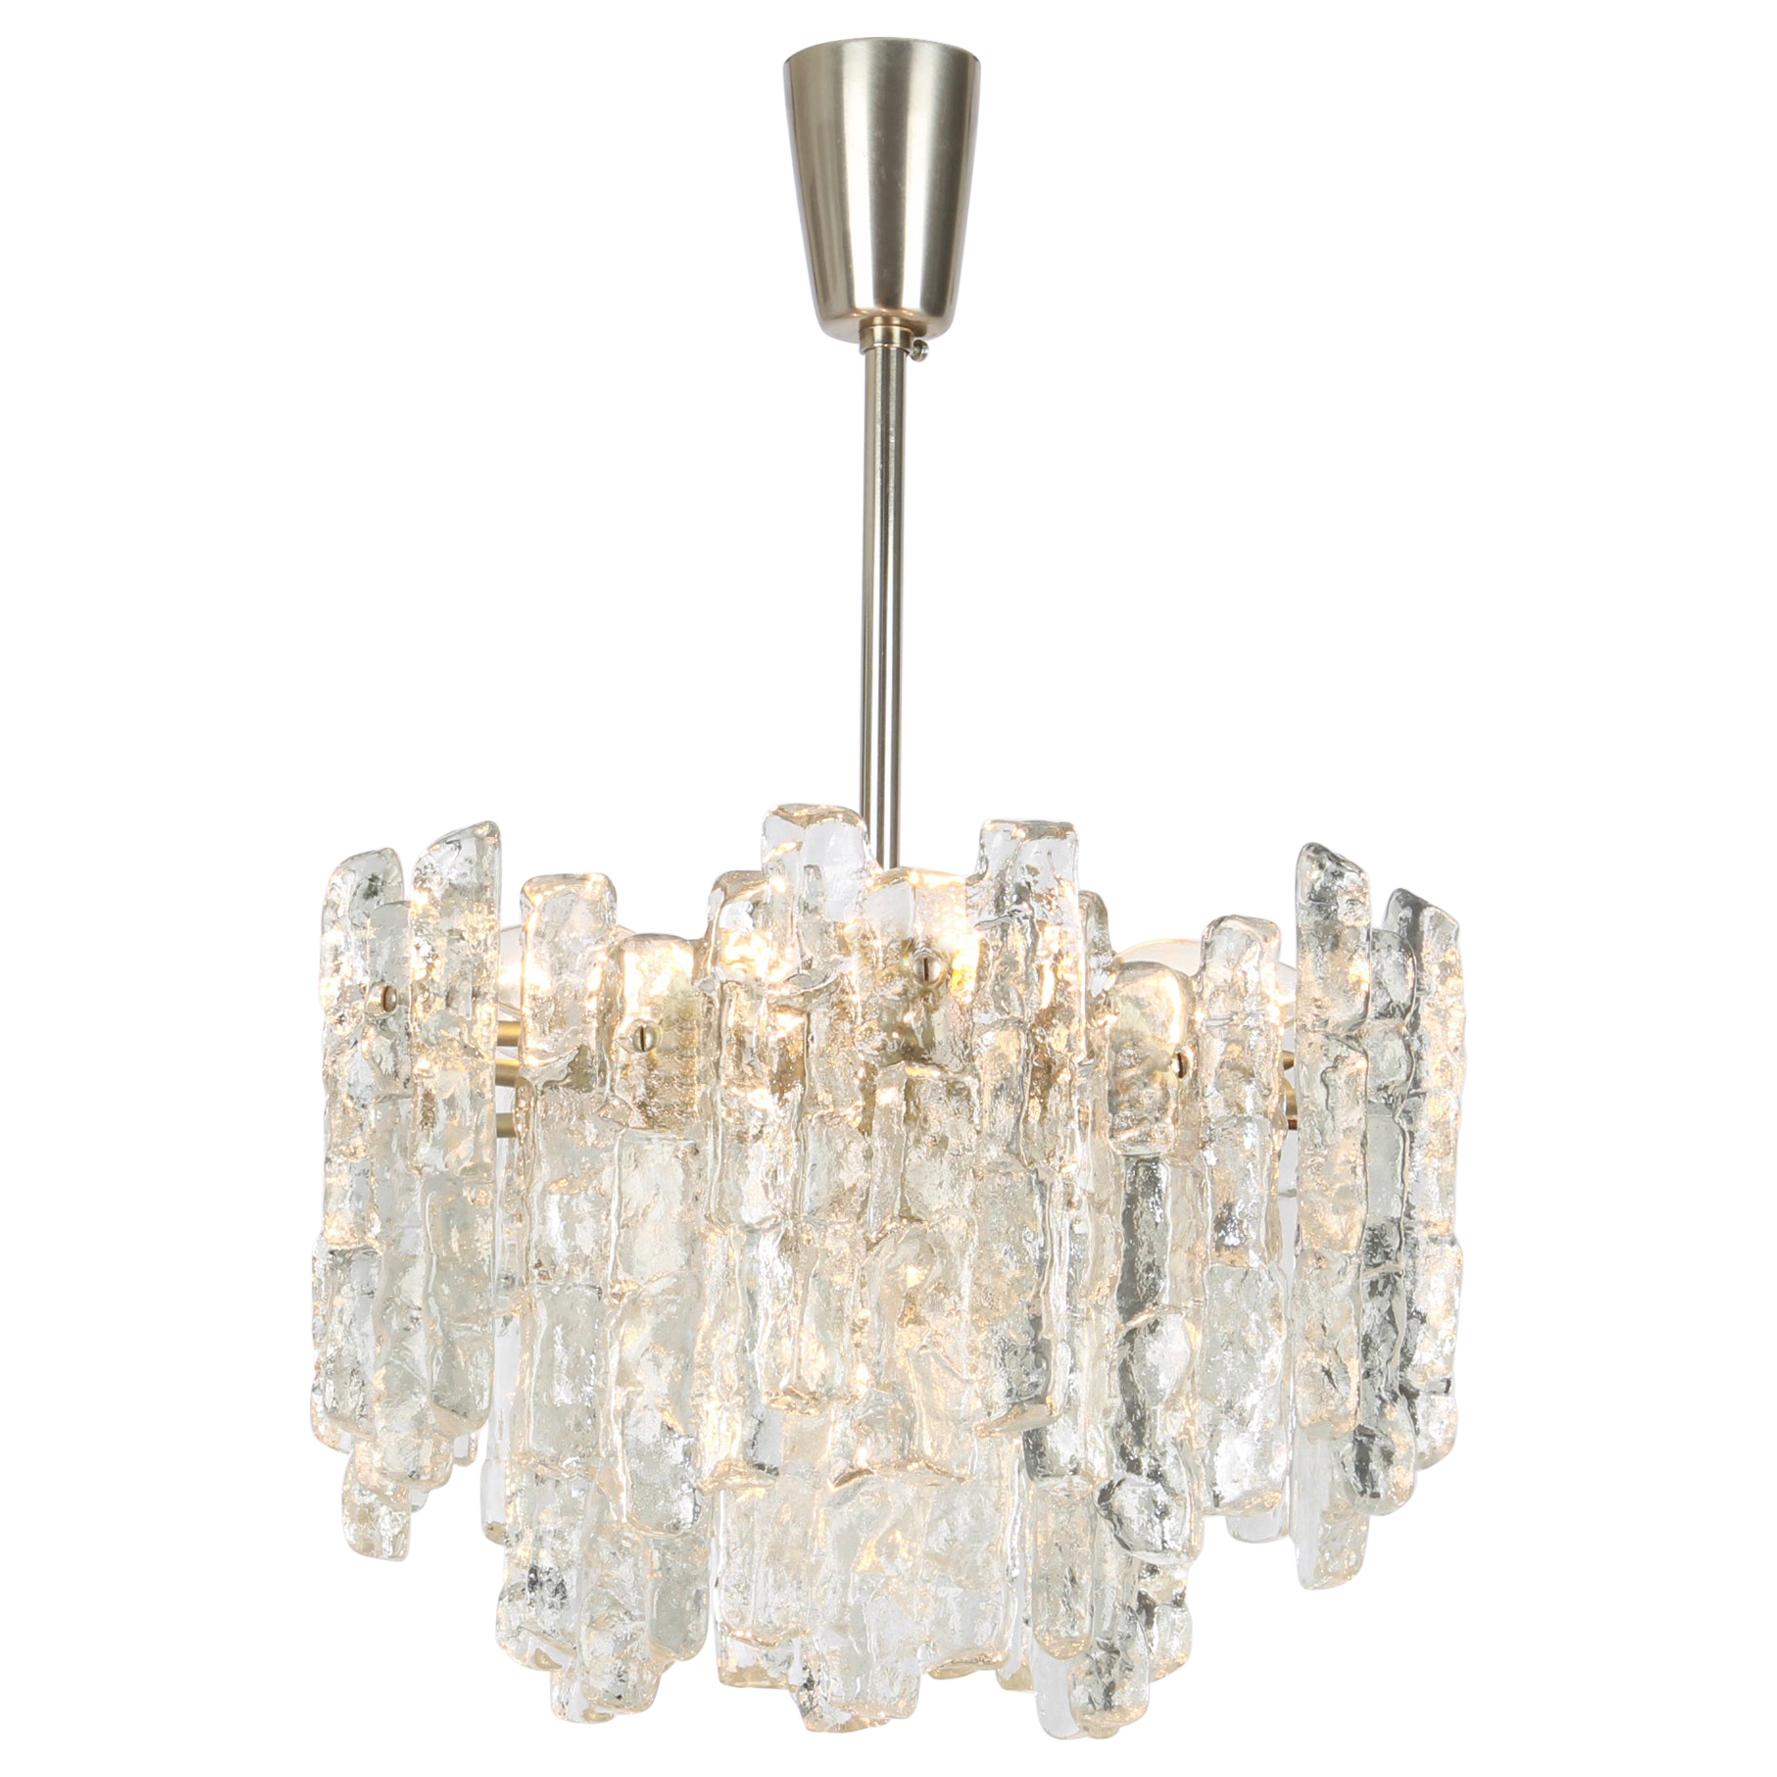 1 of 2 Large Murano Ice Glass Chandelier by Kalmar, Austria, 1960s For Sale